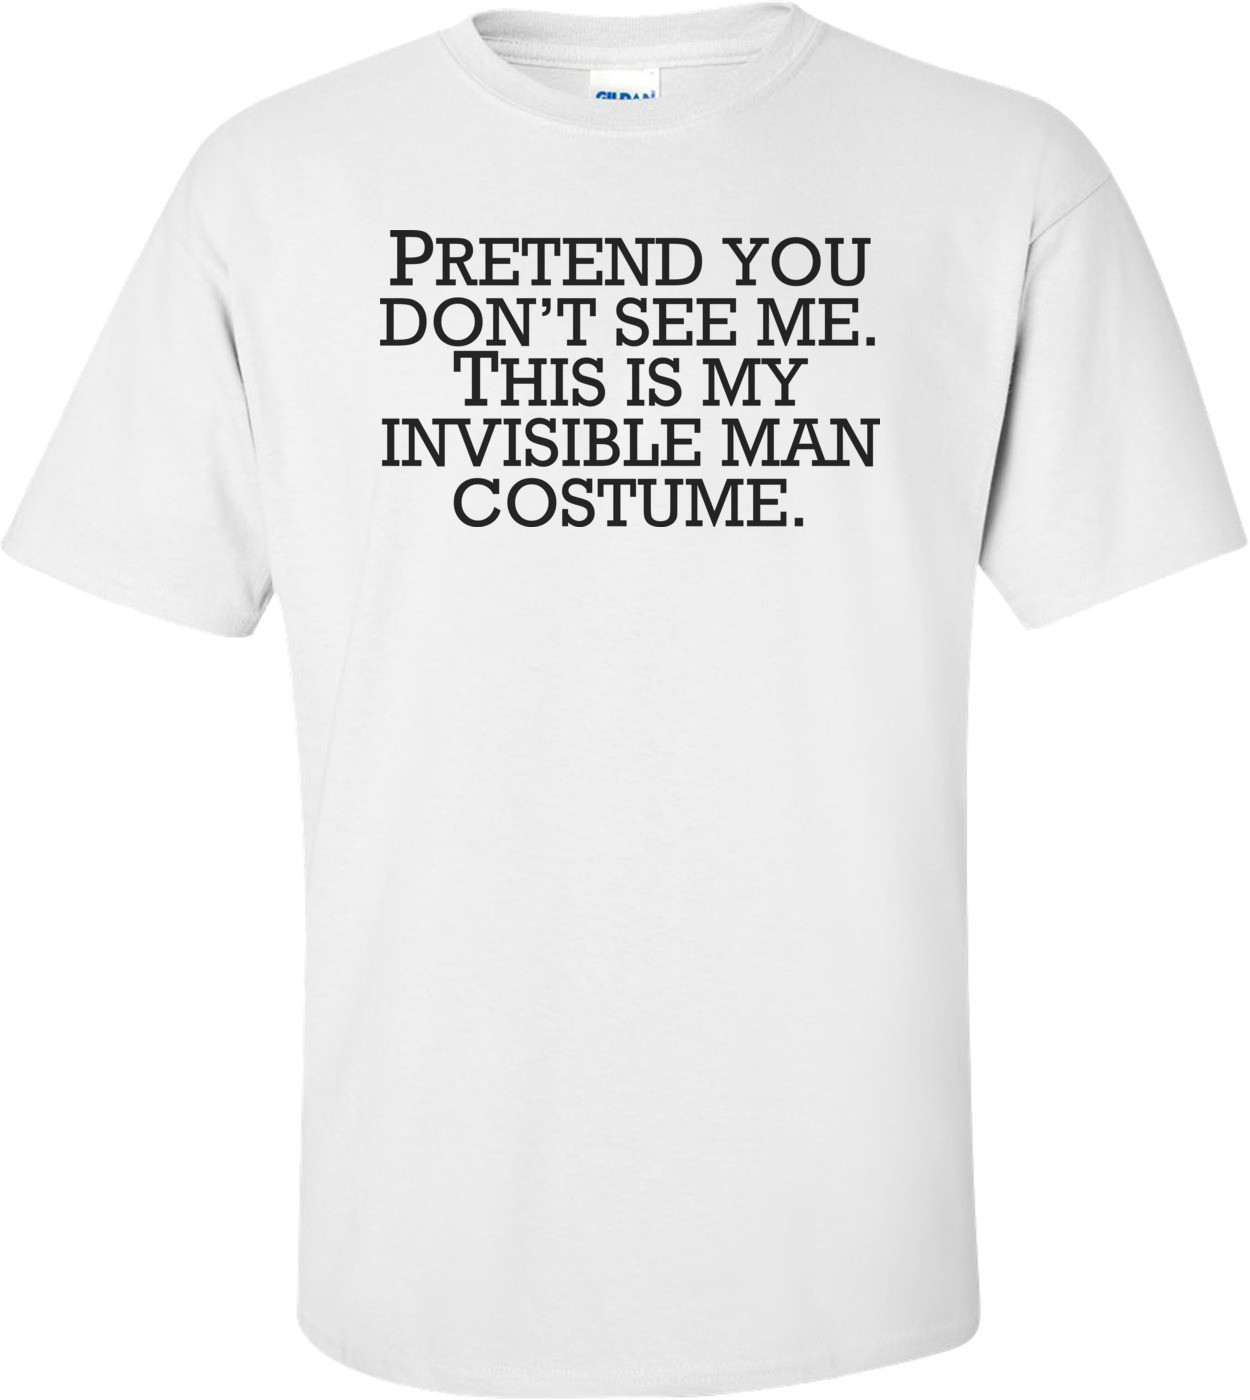 Invisible Man Costume Pretend You Don't See Me - Halloween Shirt